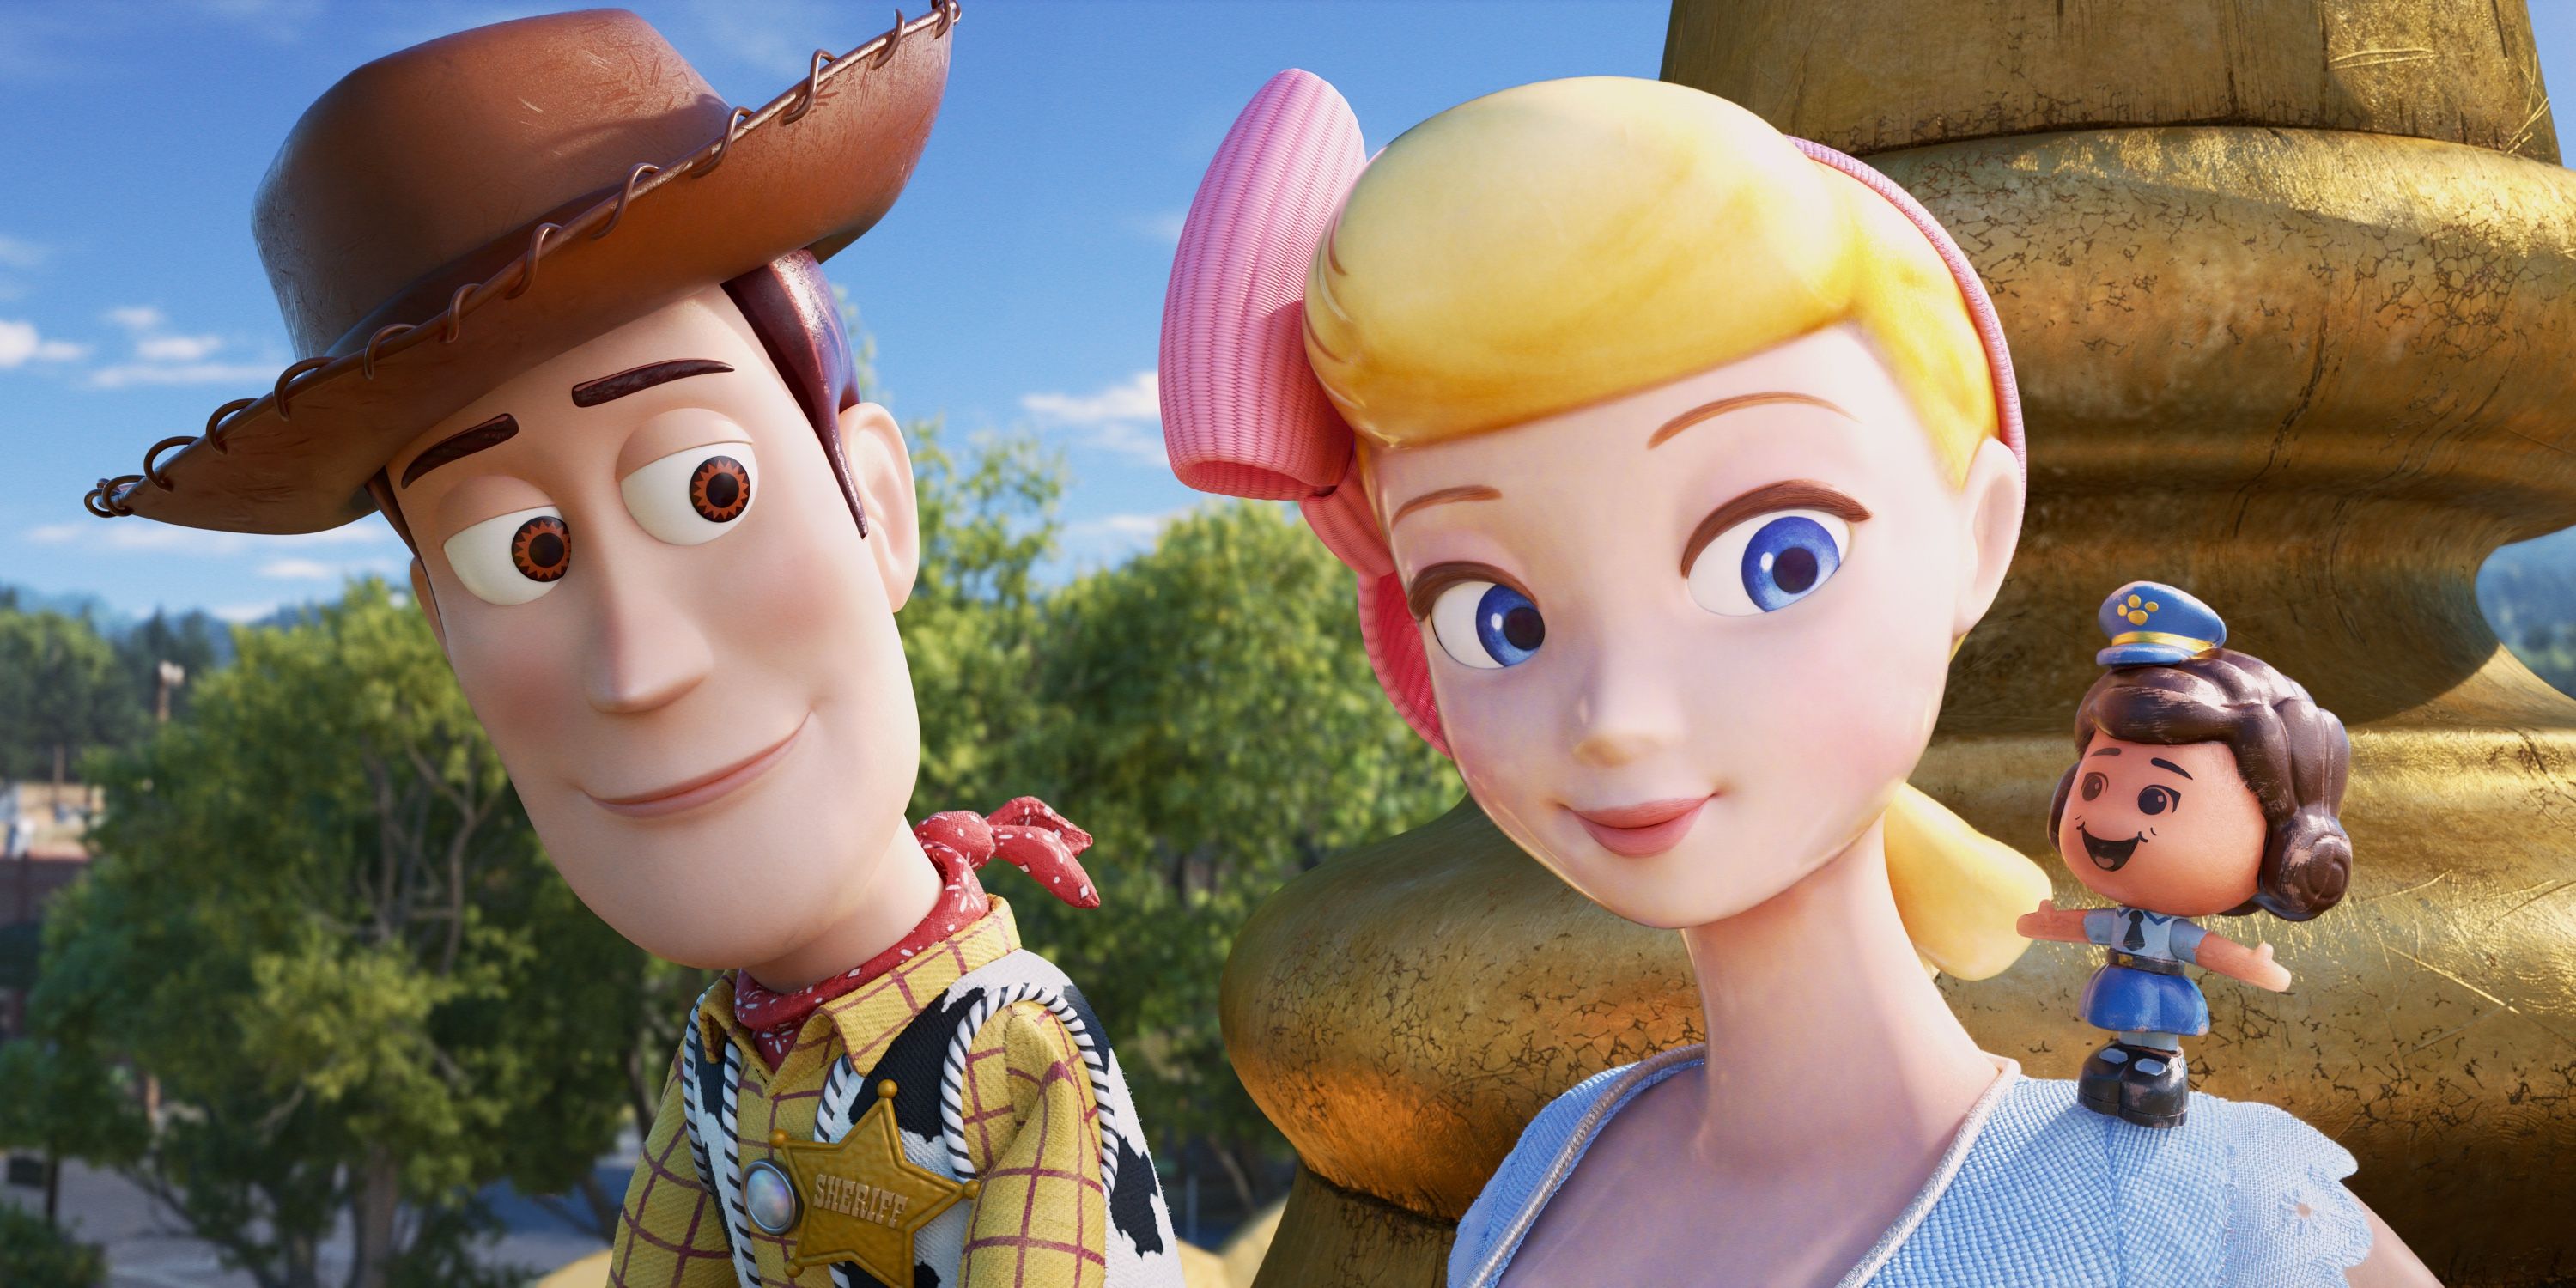 Woody and Bo Peep in Toy Story 4 sitting on a fountain